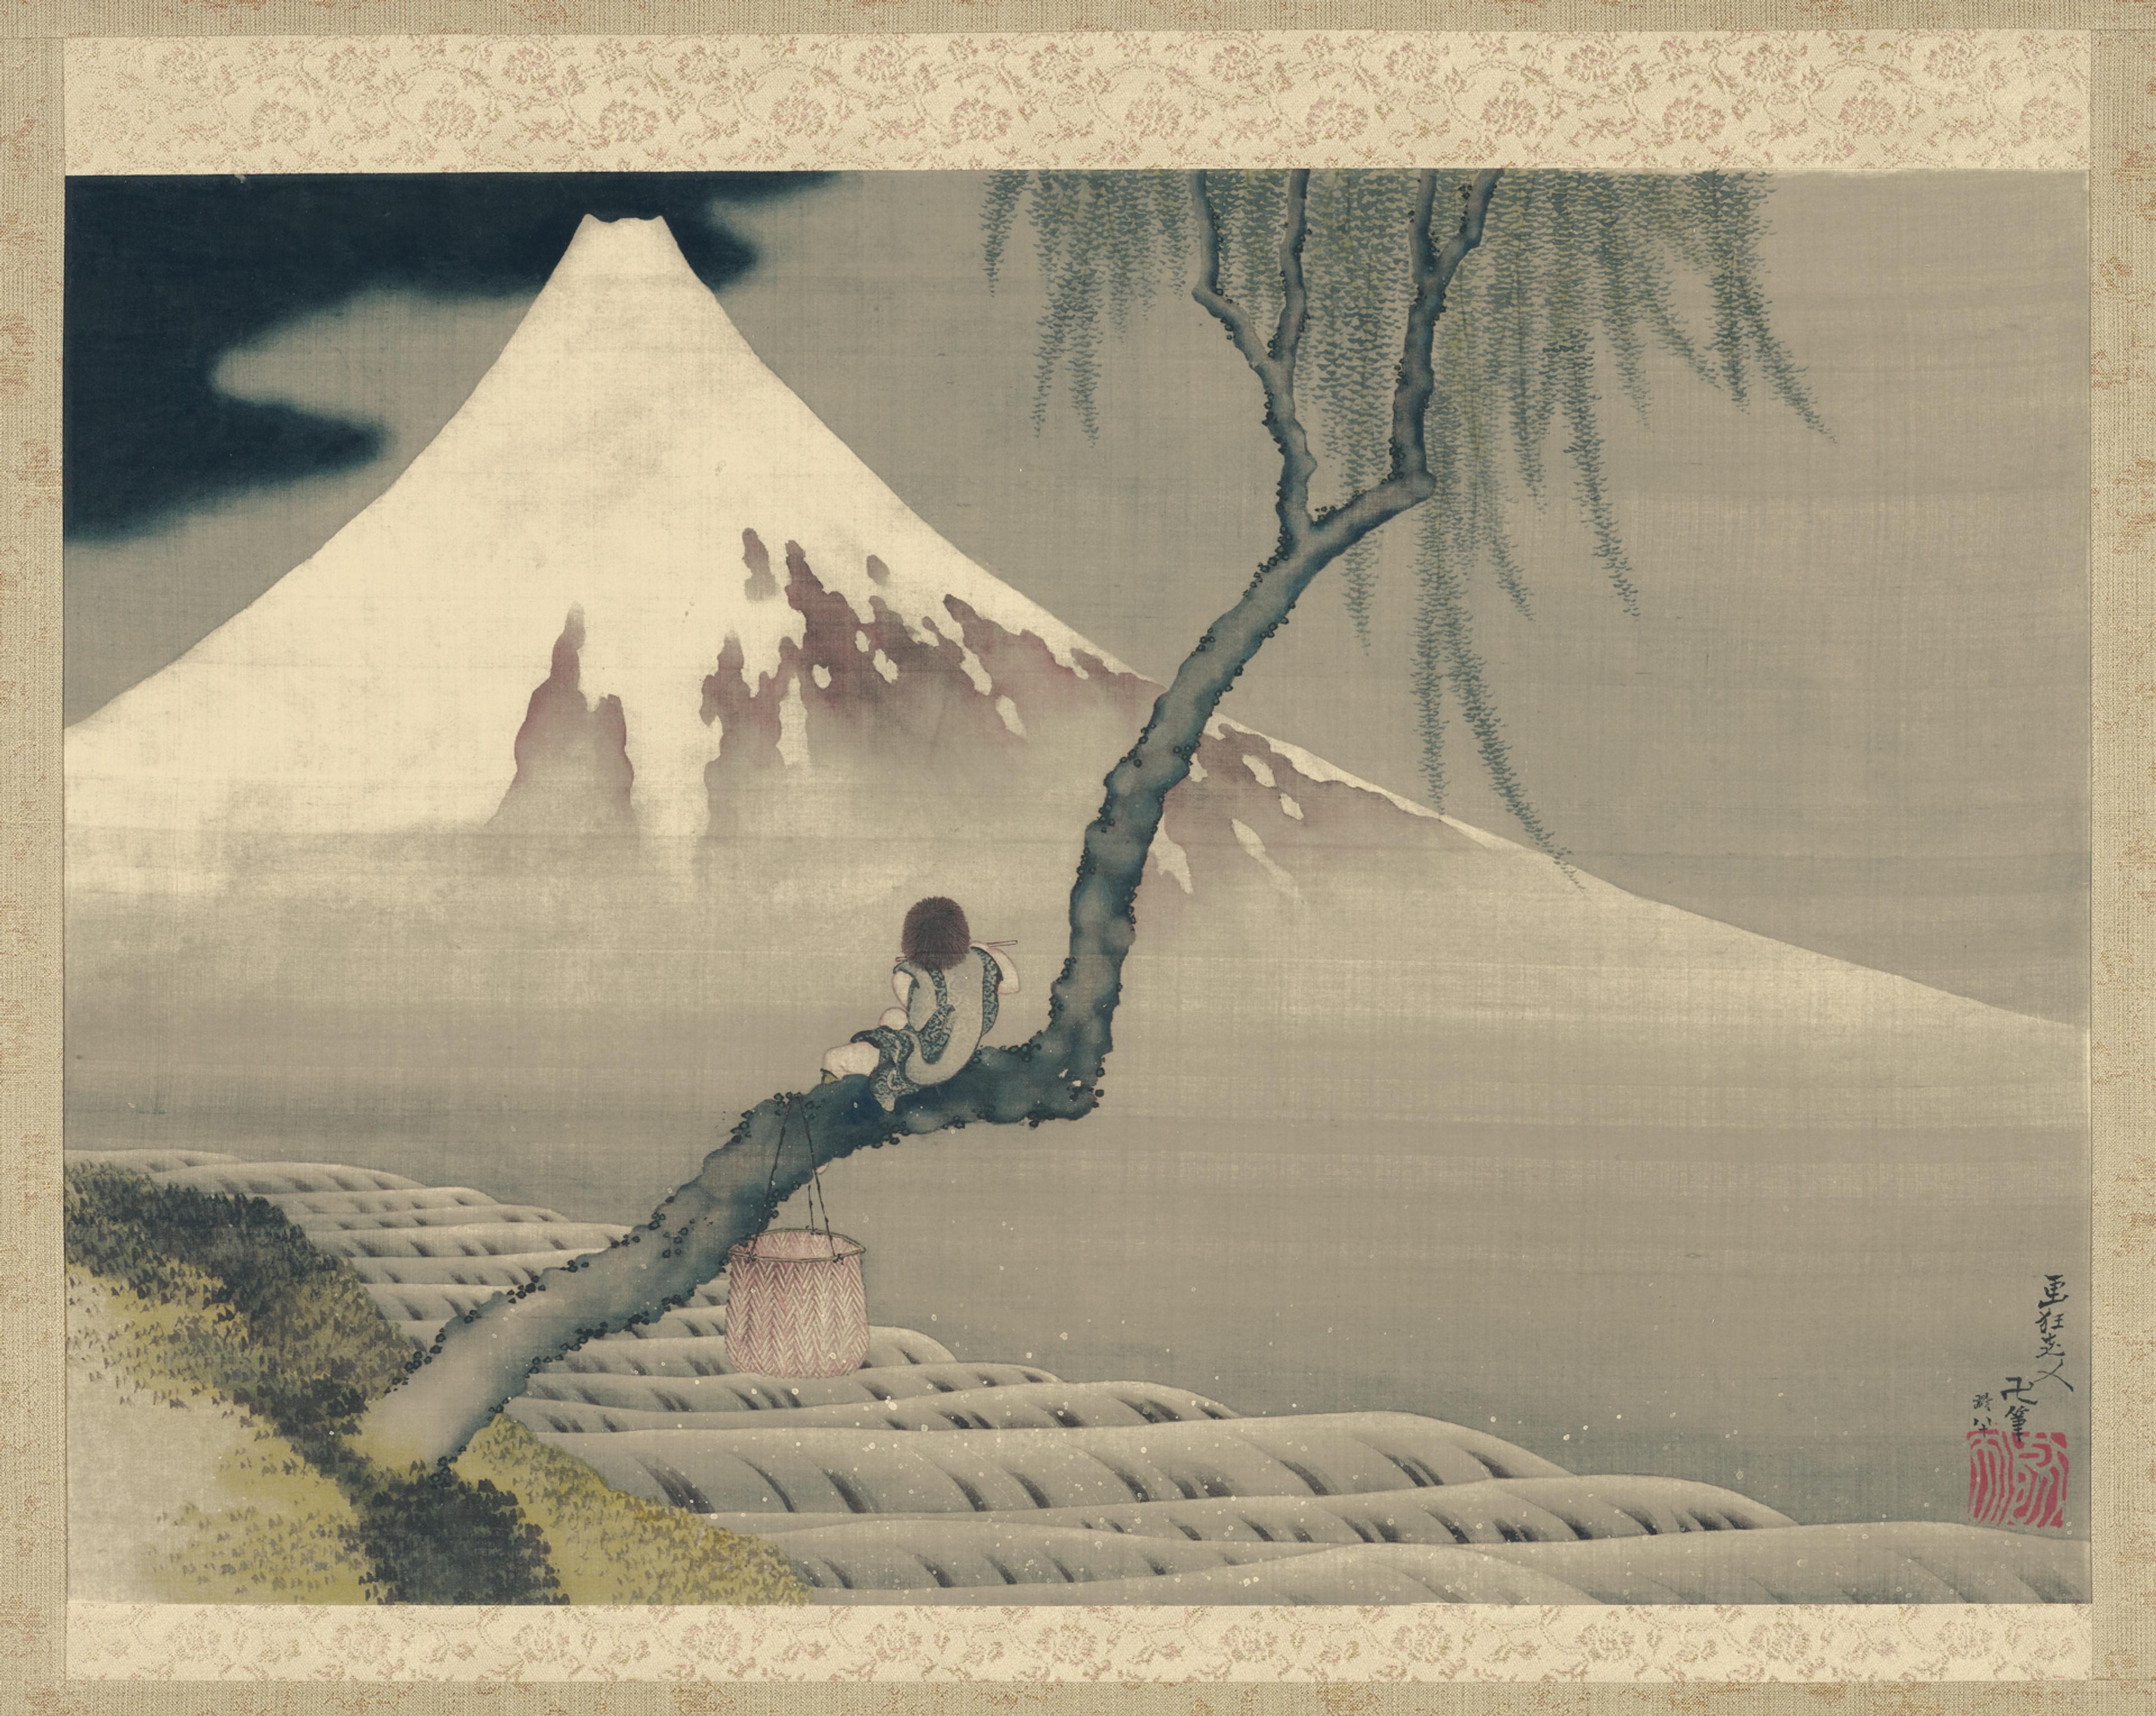 A silk painting of a small child sat on a twisty tree, seen from behind. The child is looking at snowcapped Mount Fuji, towering in the background.